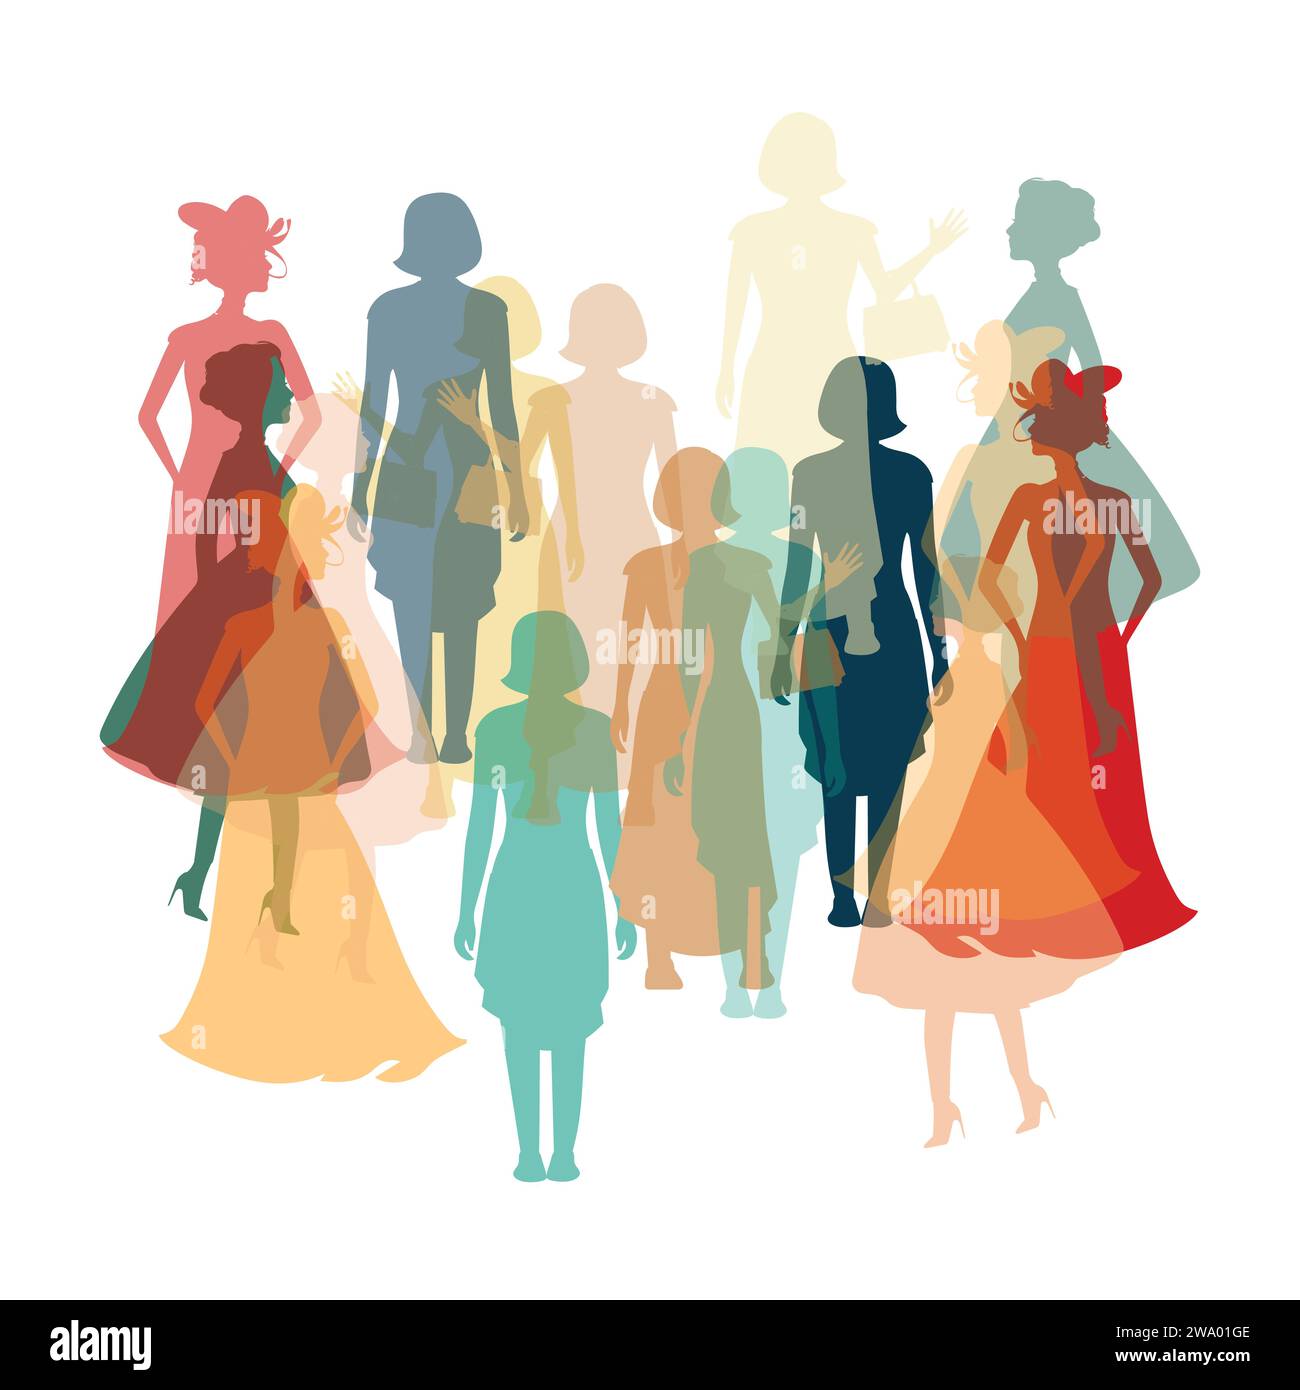 Colorful diverse people crowd. Diverse people group. Flat design vector illustration. A colorful illustration of diverse silhouetted people in profile Stock Vector